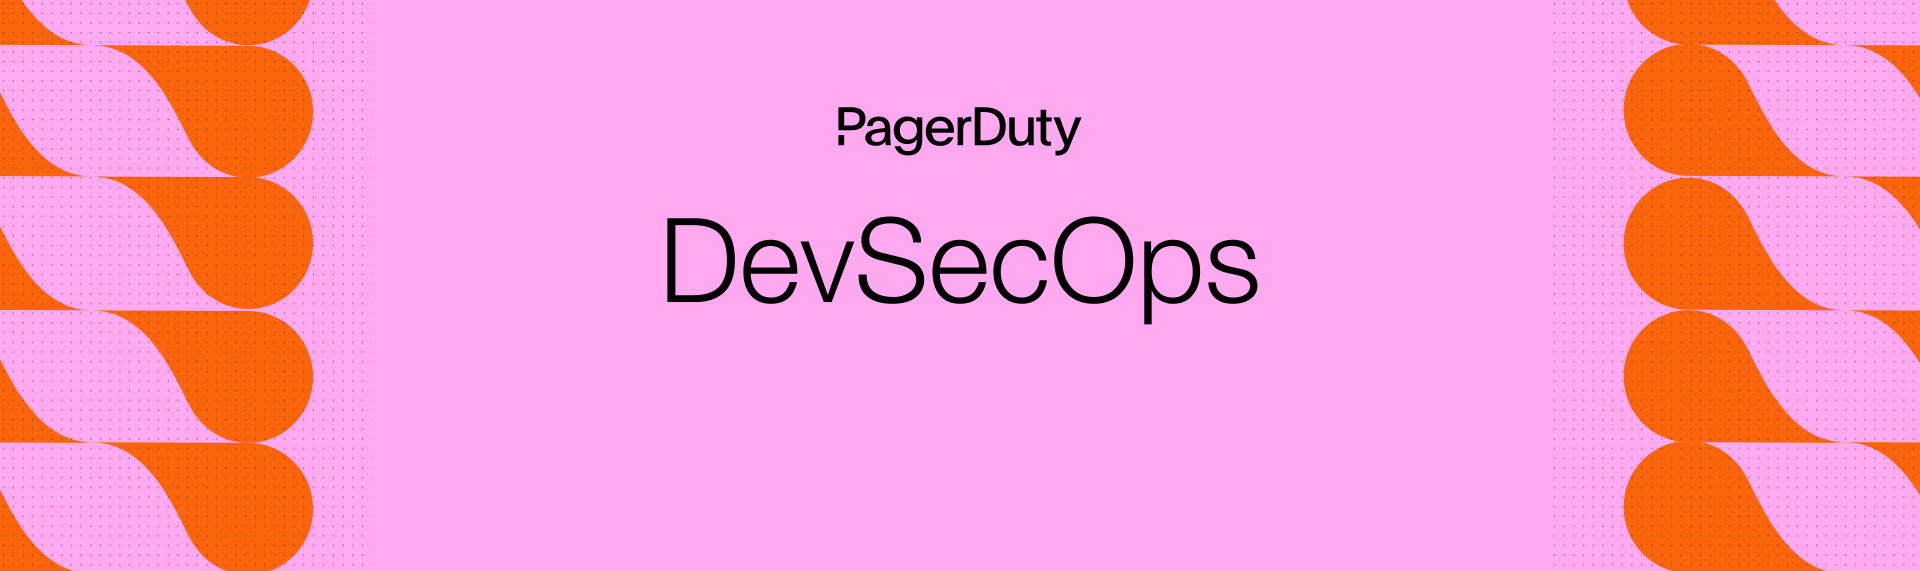 DevSecOps Guide Home Page